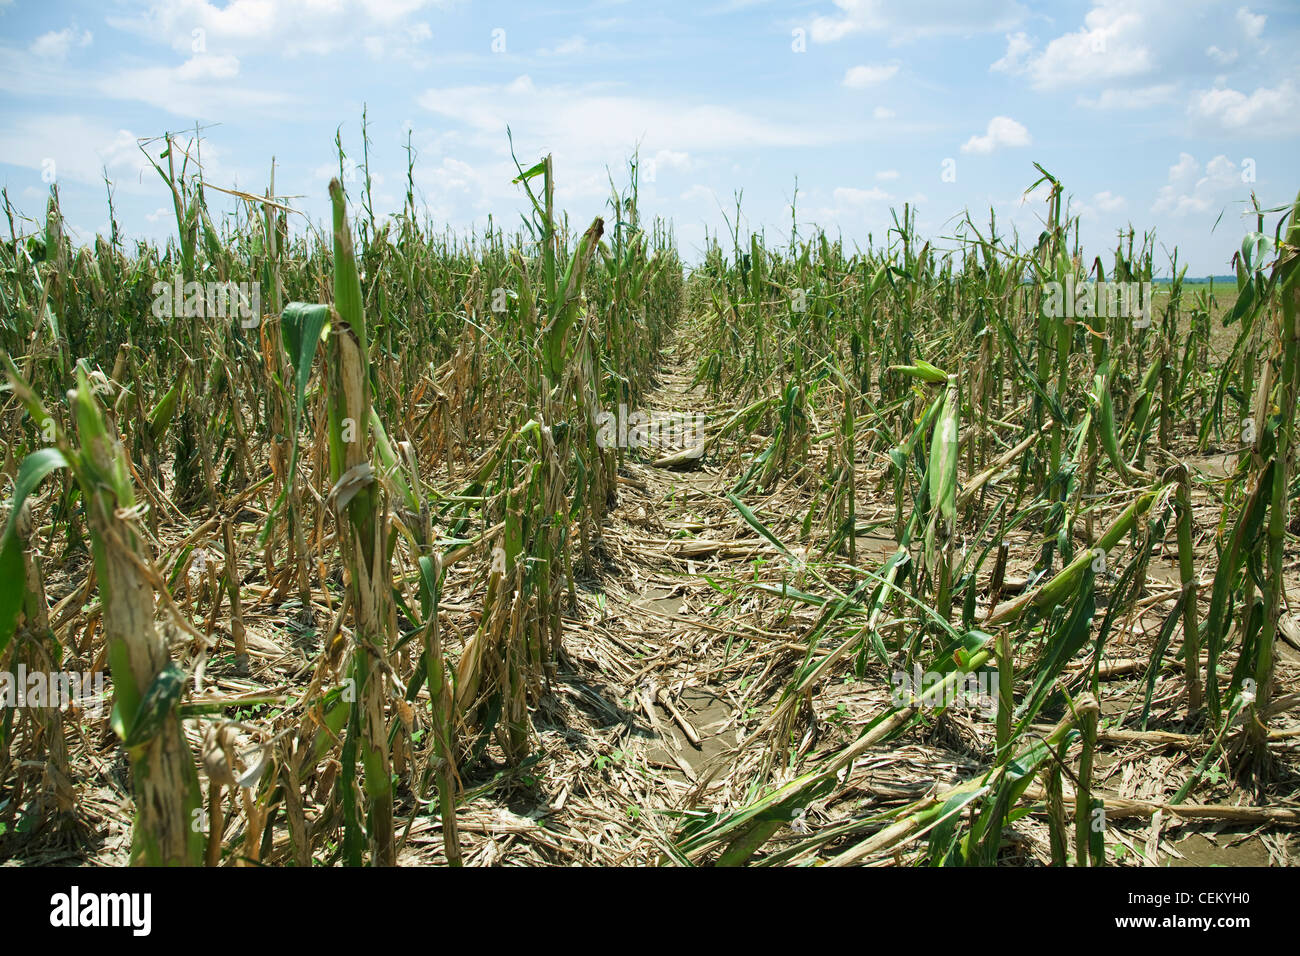 Agriculture - Mid growth grain corn field completely destroyed by a severe mid Summer hailstorm / near England, Arkansas, USA. Stock Photo